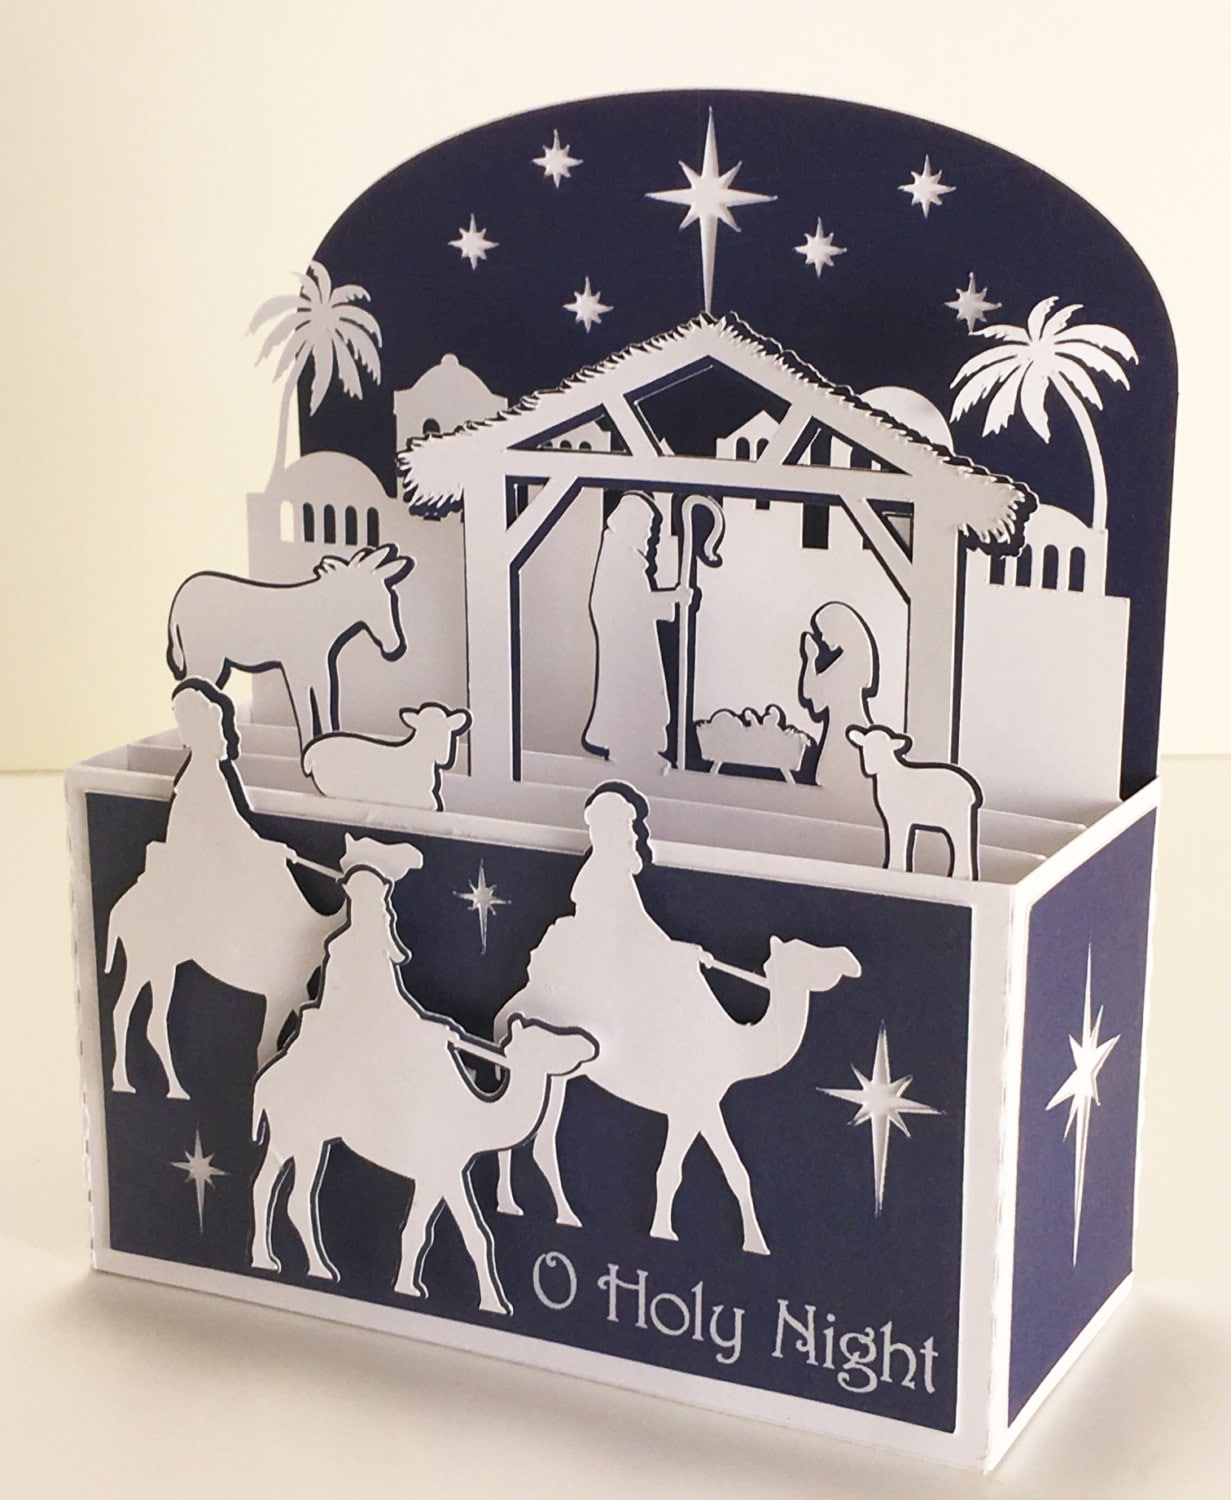 Download Nativity Christmas Card In A Box 3D SVG | Etsy